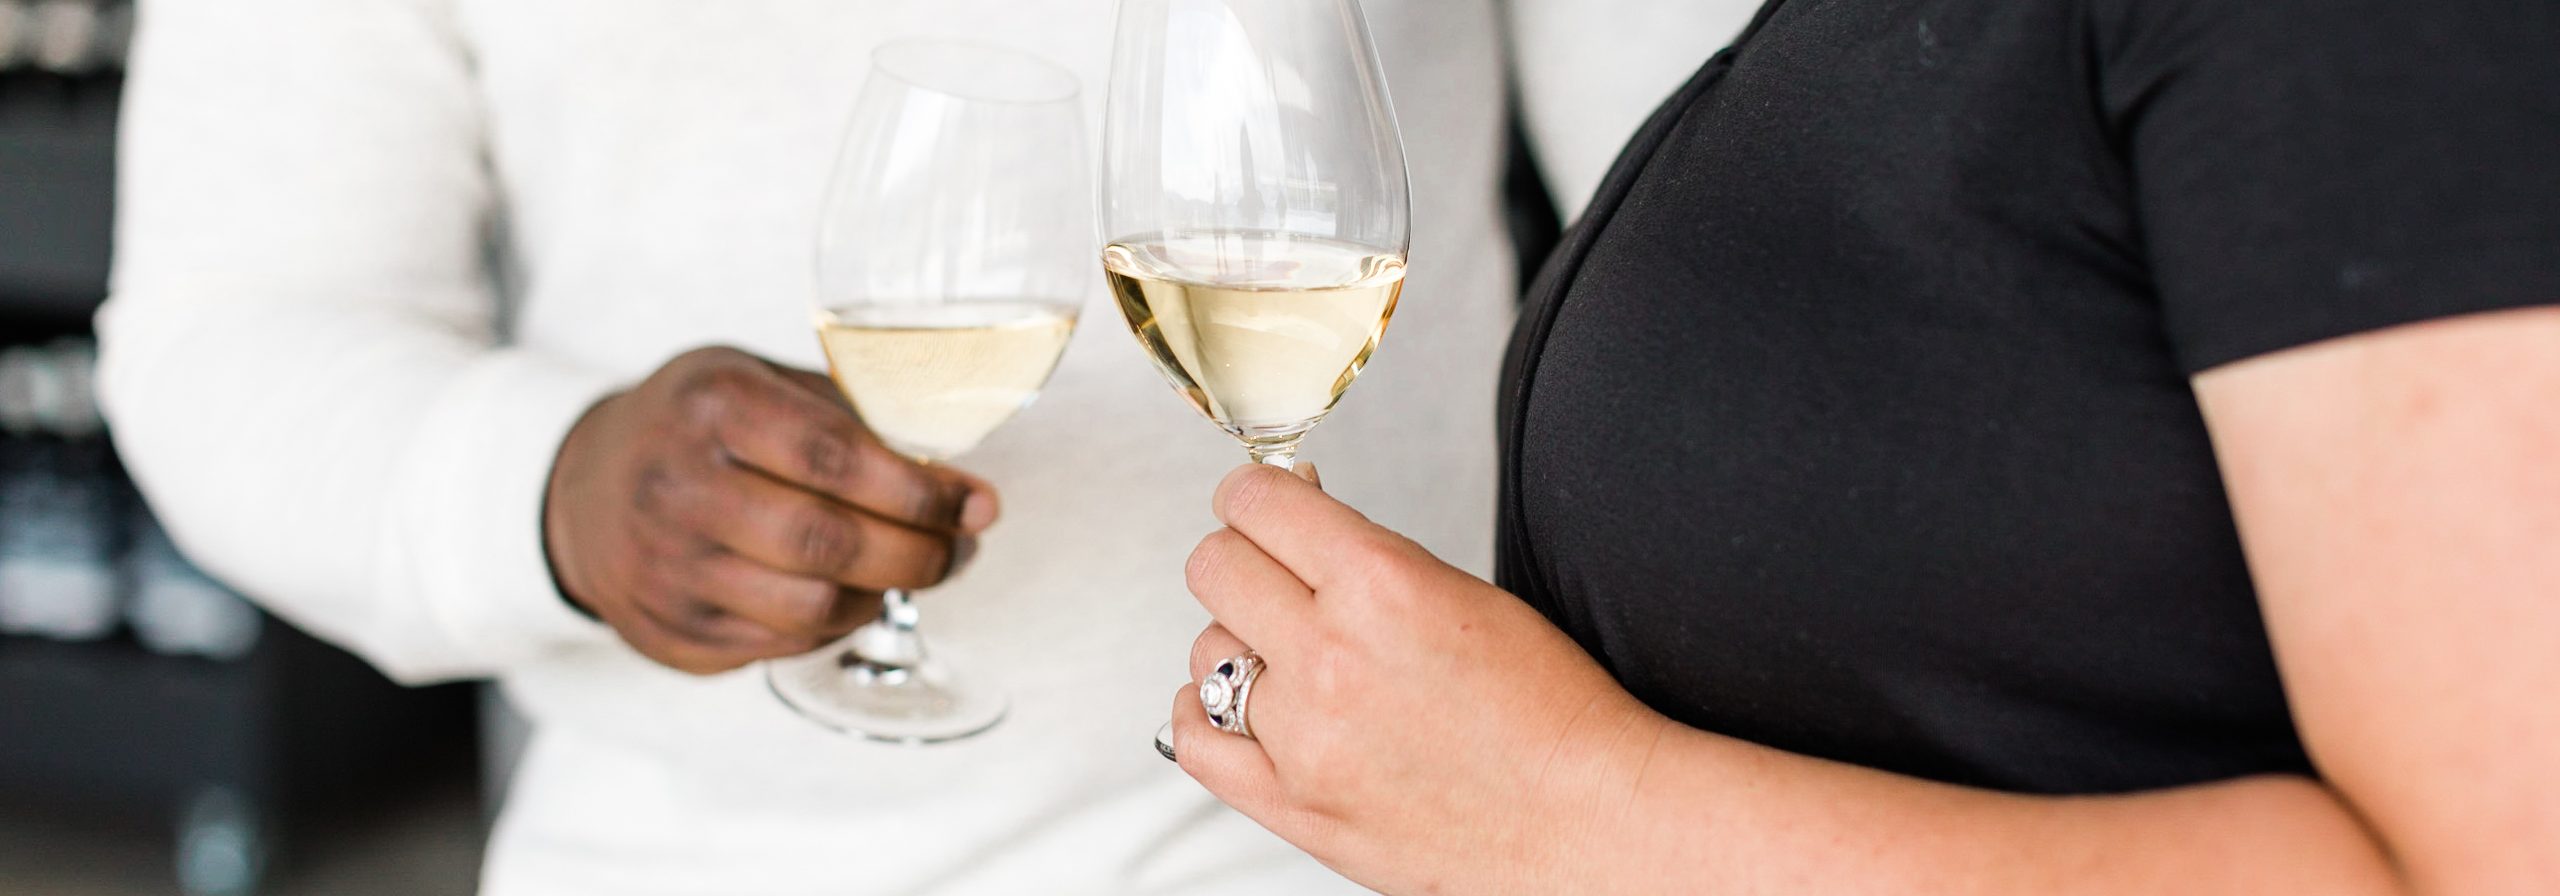 Inter-racial couple holding wine glasses close together